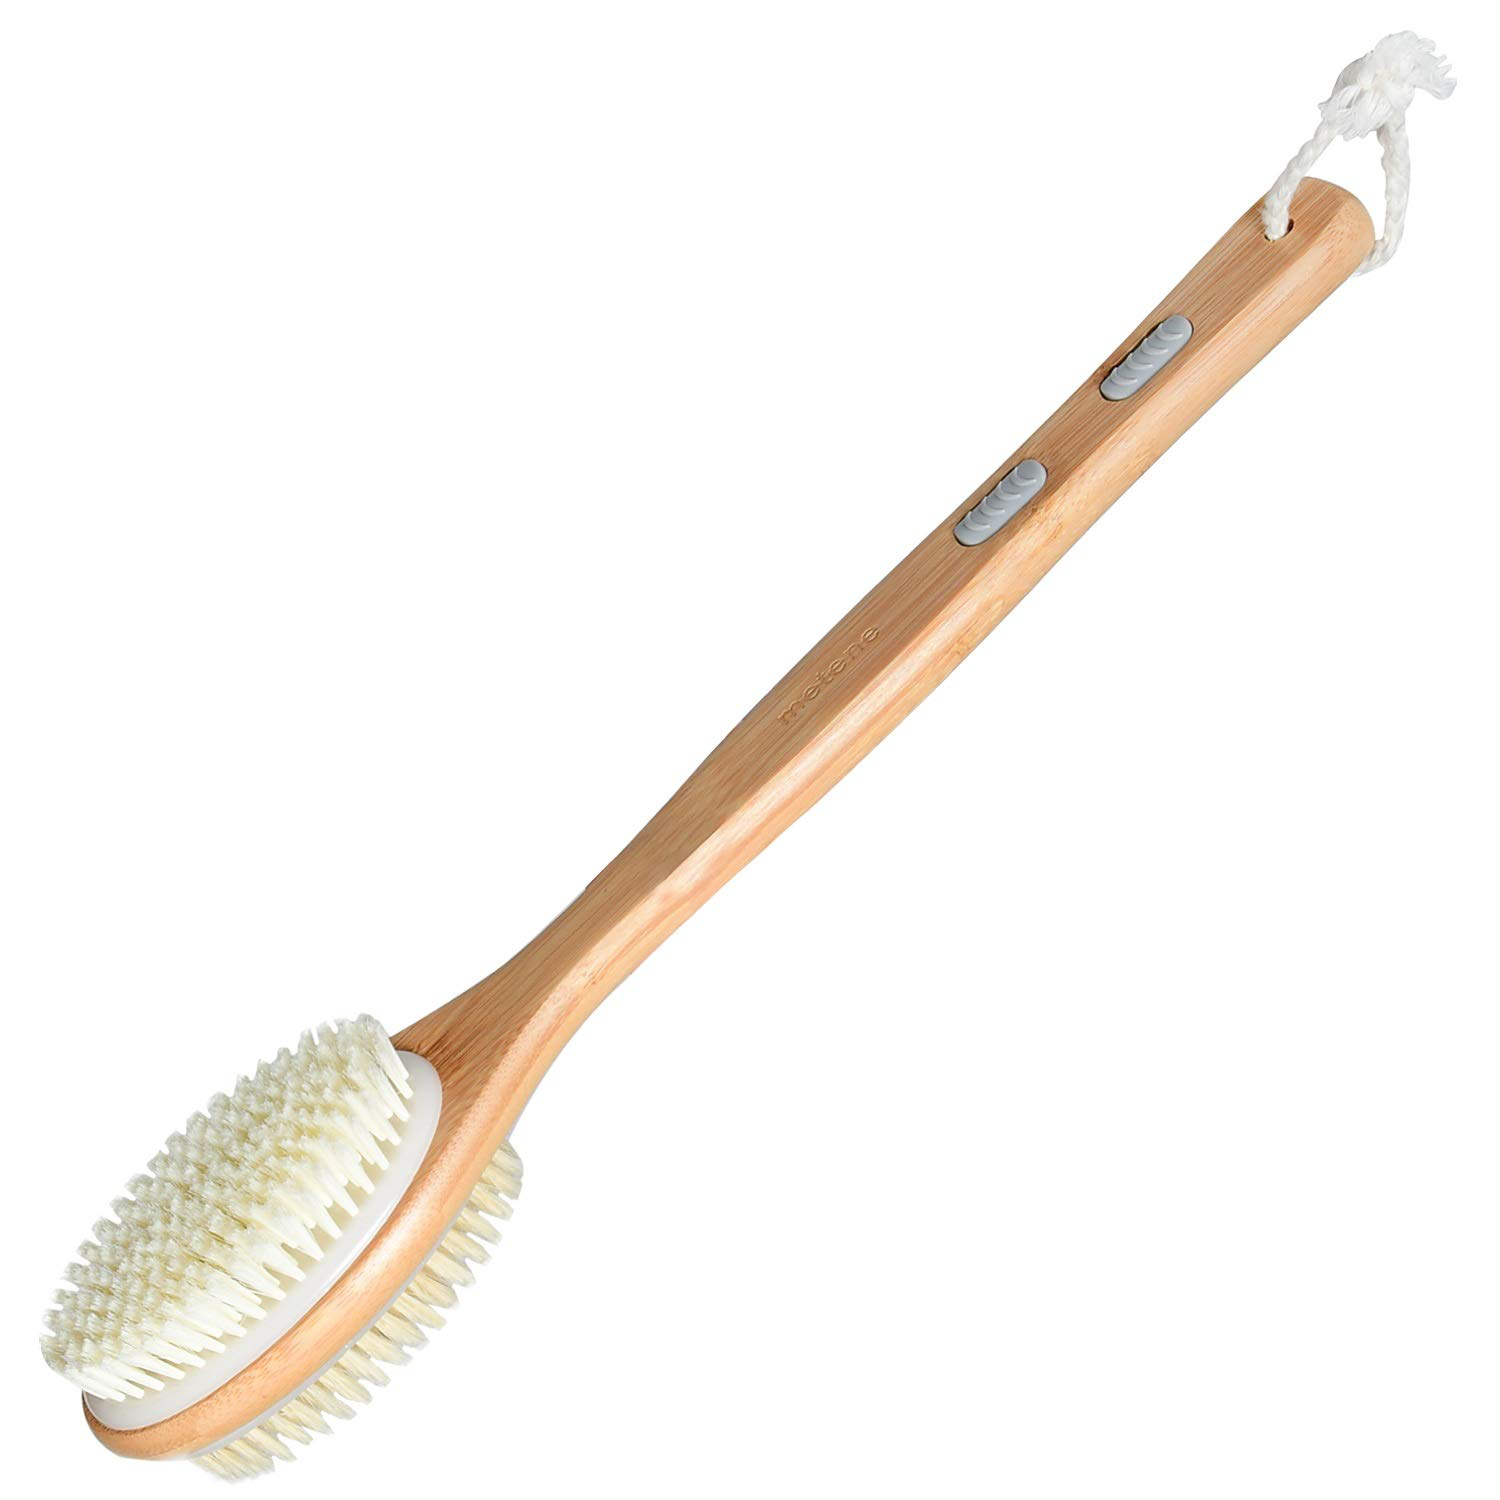 Metene Bamboo Shower Body Exfoliating Brush, Bath Back Cleaning Scrubber with Upgrade Long Handle, Dry or Wet Skin Exfoliator Brush with Soft and Stiff Bristles Back Washer for Men Women